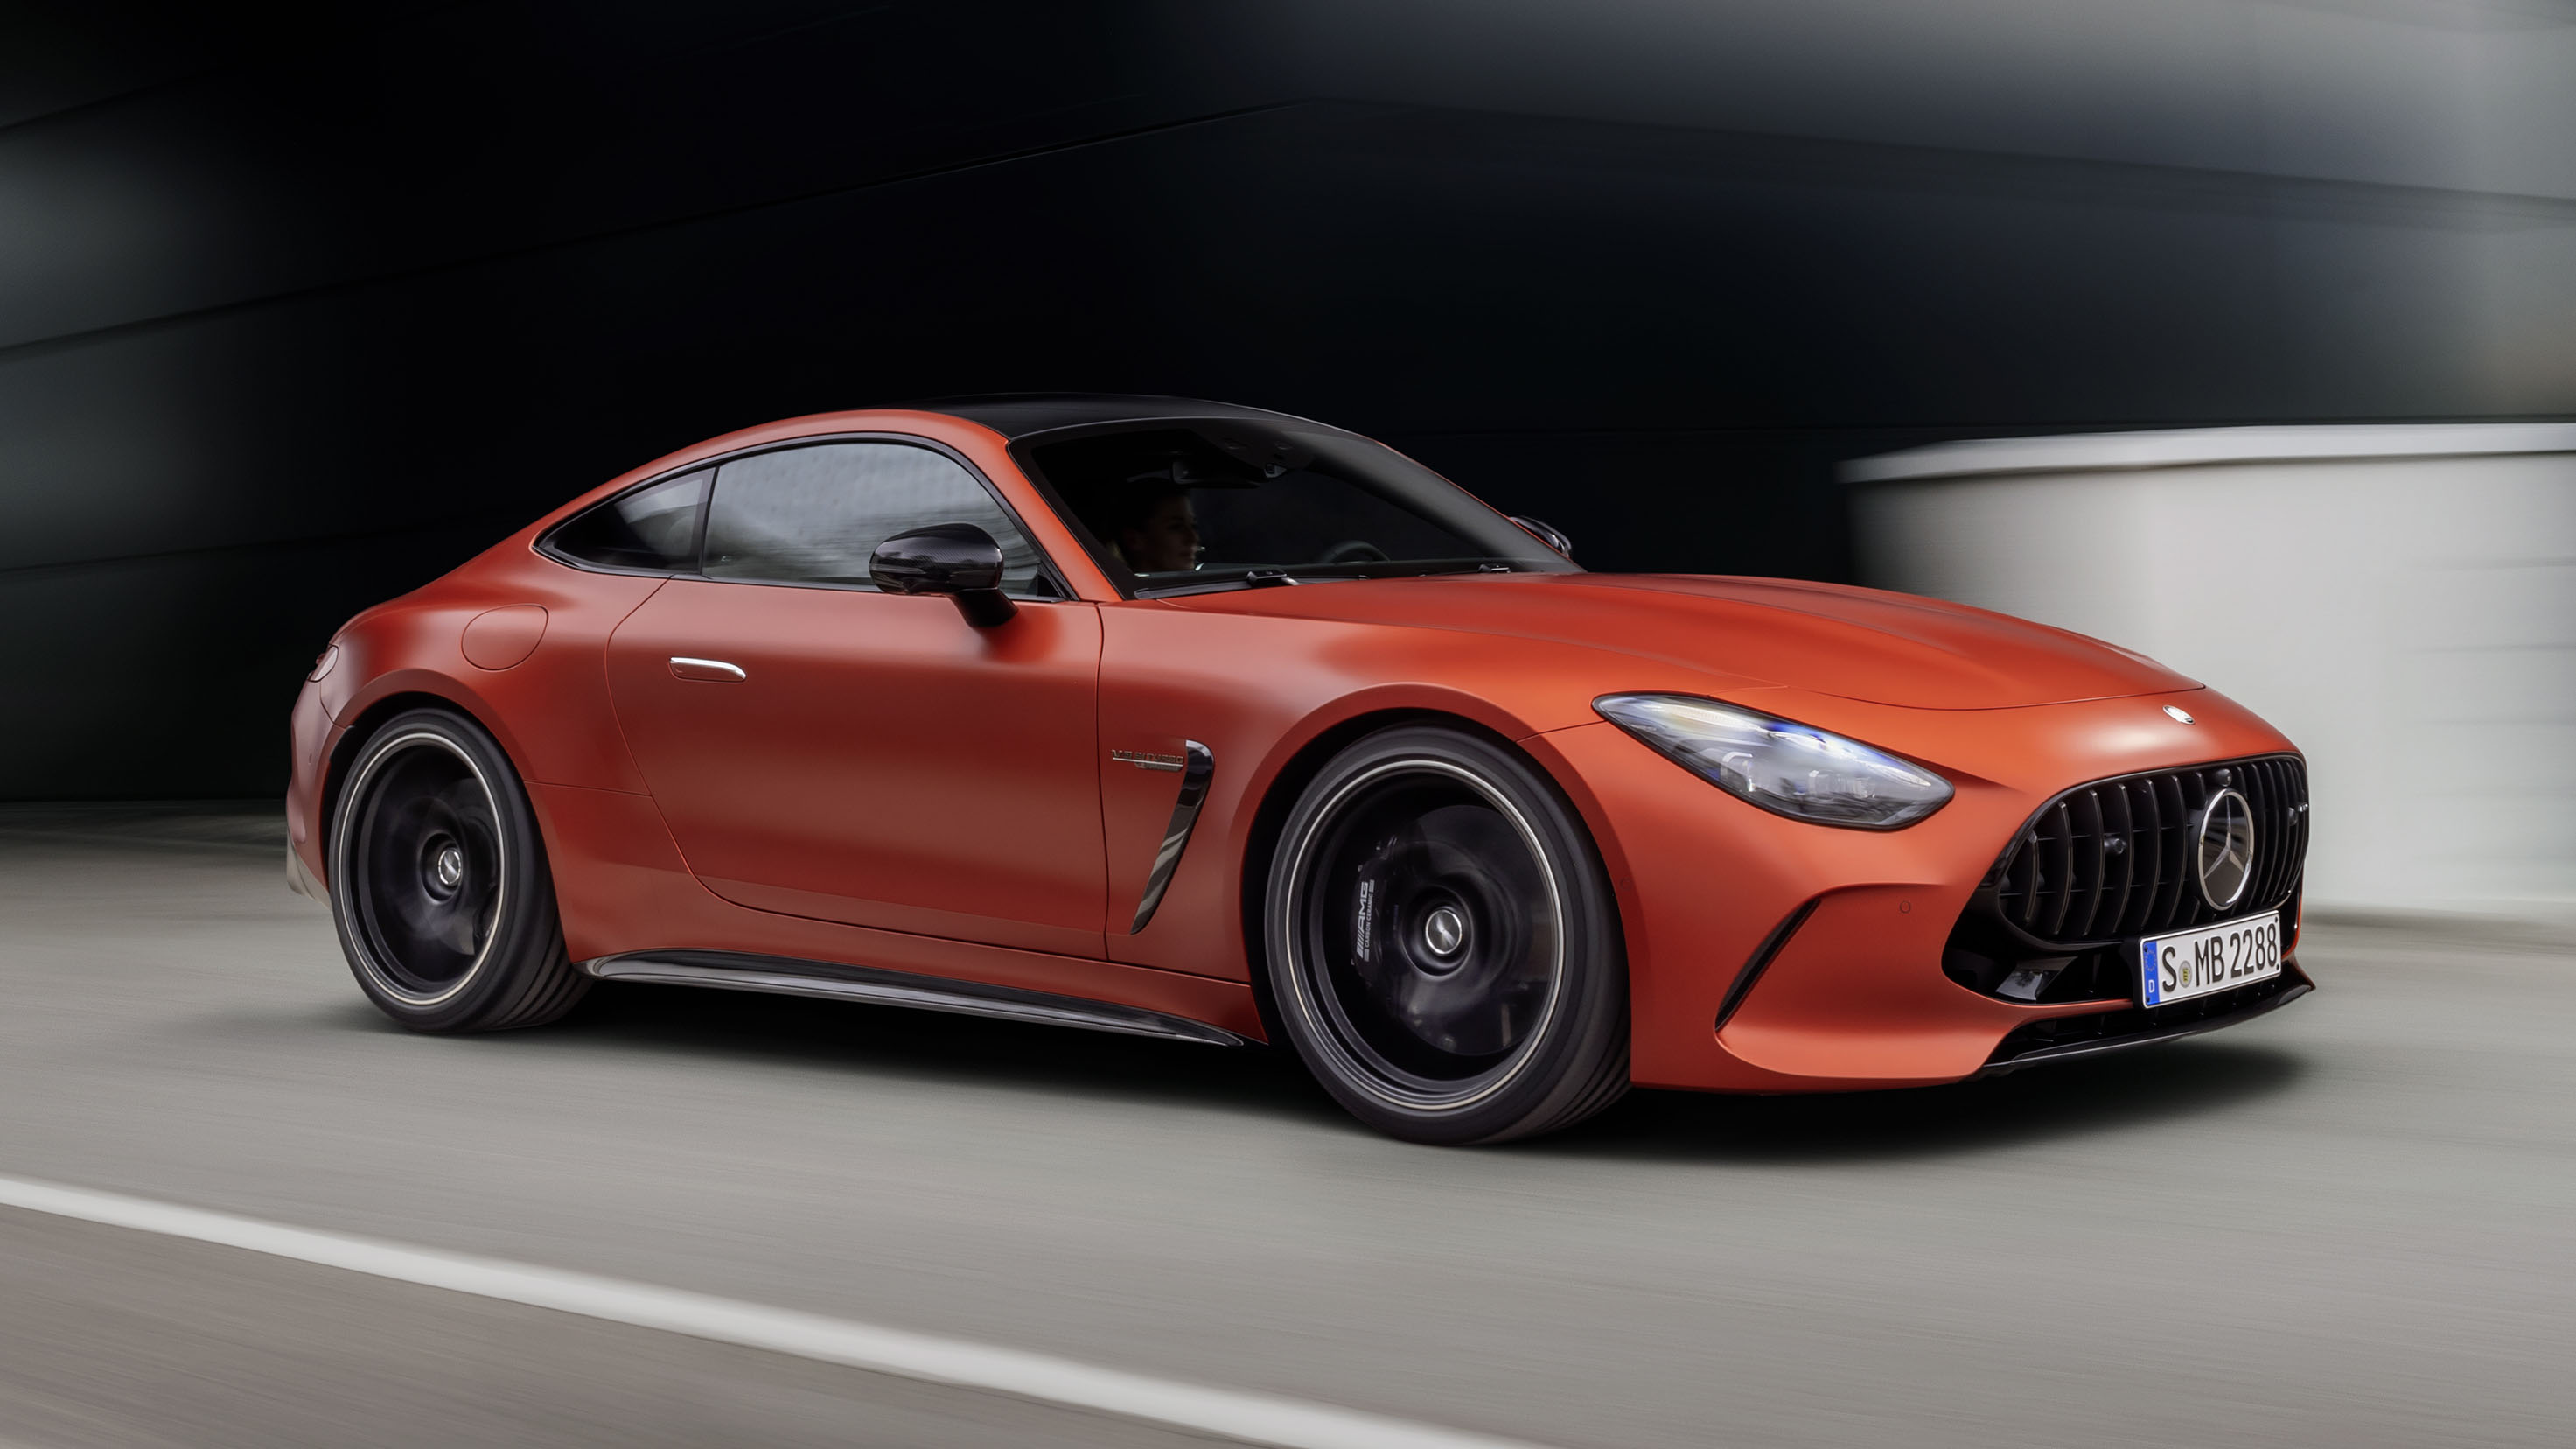 behold, the fastest-accelerating mercedes-amg ever: the new amg gt hybrid